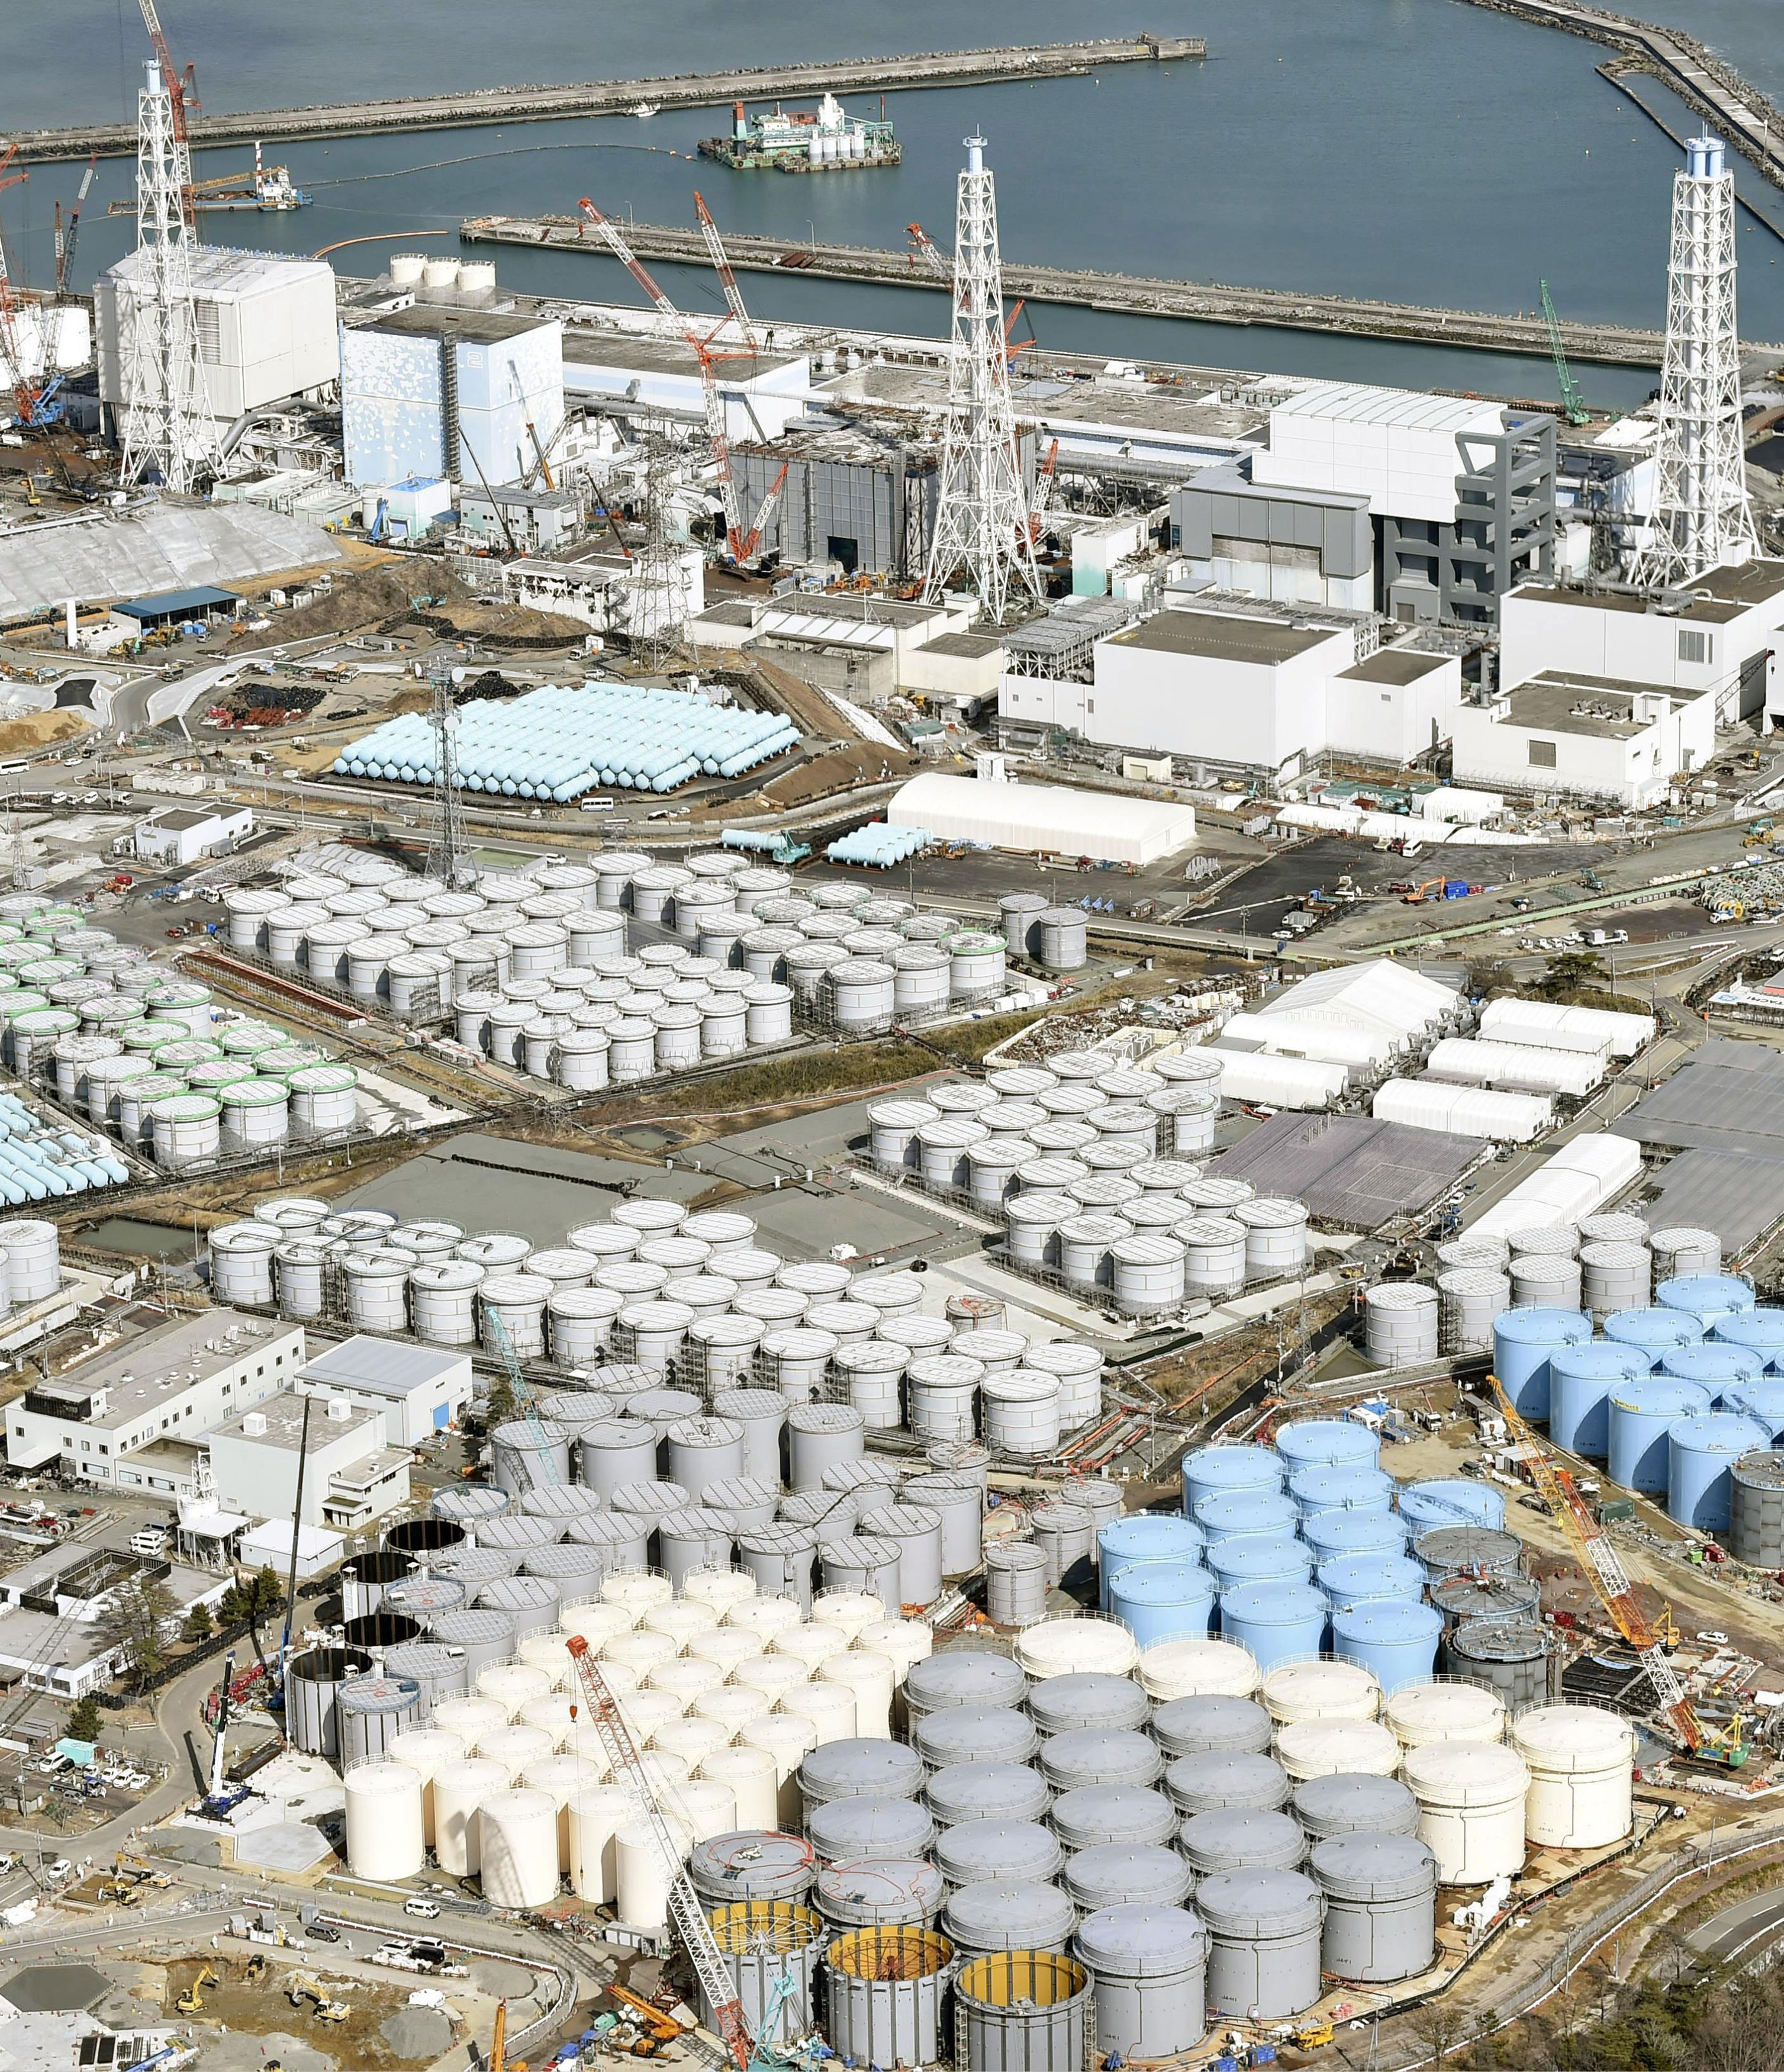 Tanks of radiation-contaminated water are seen at Tokyo Electric Power Co. (TEPCO)'s Fukushima Daiichi nuclear power plant in Fukushima, Japan on March 11, 2015. (Kyodo—Reuters)